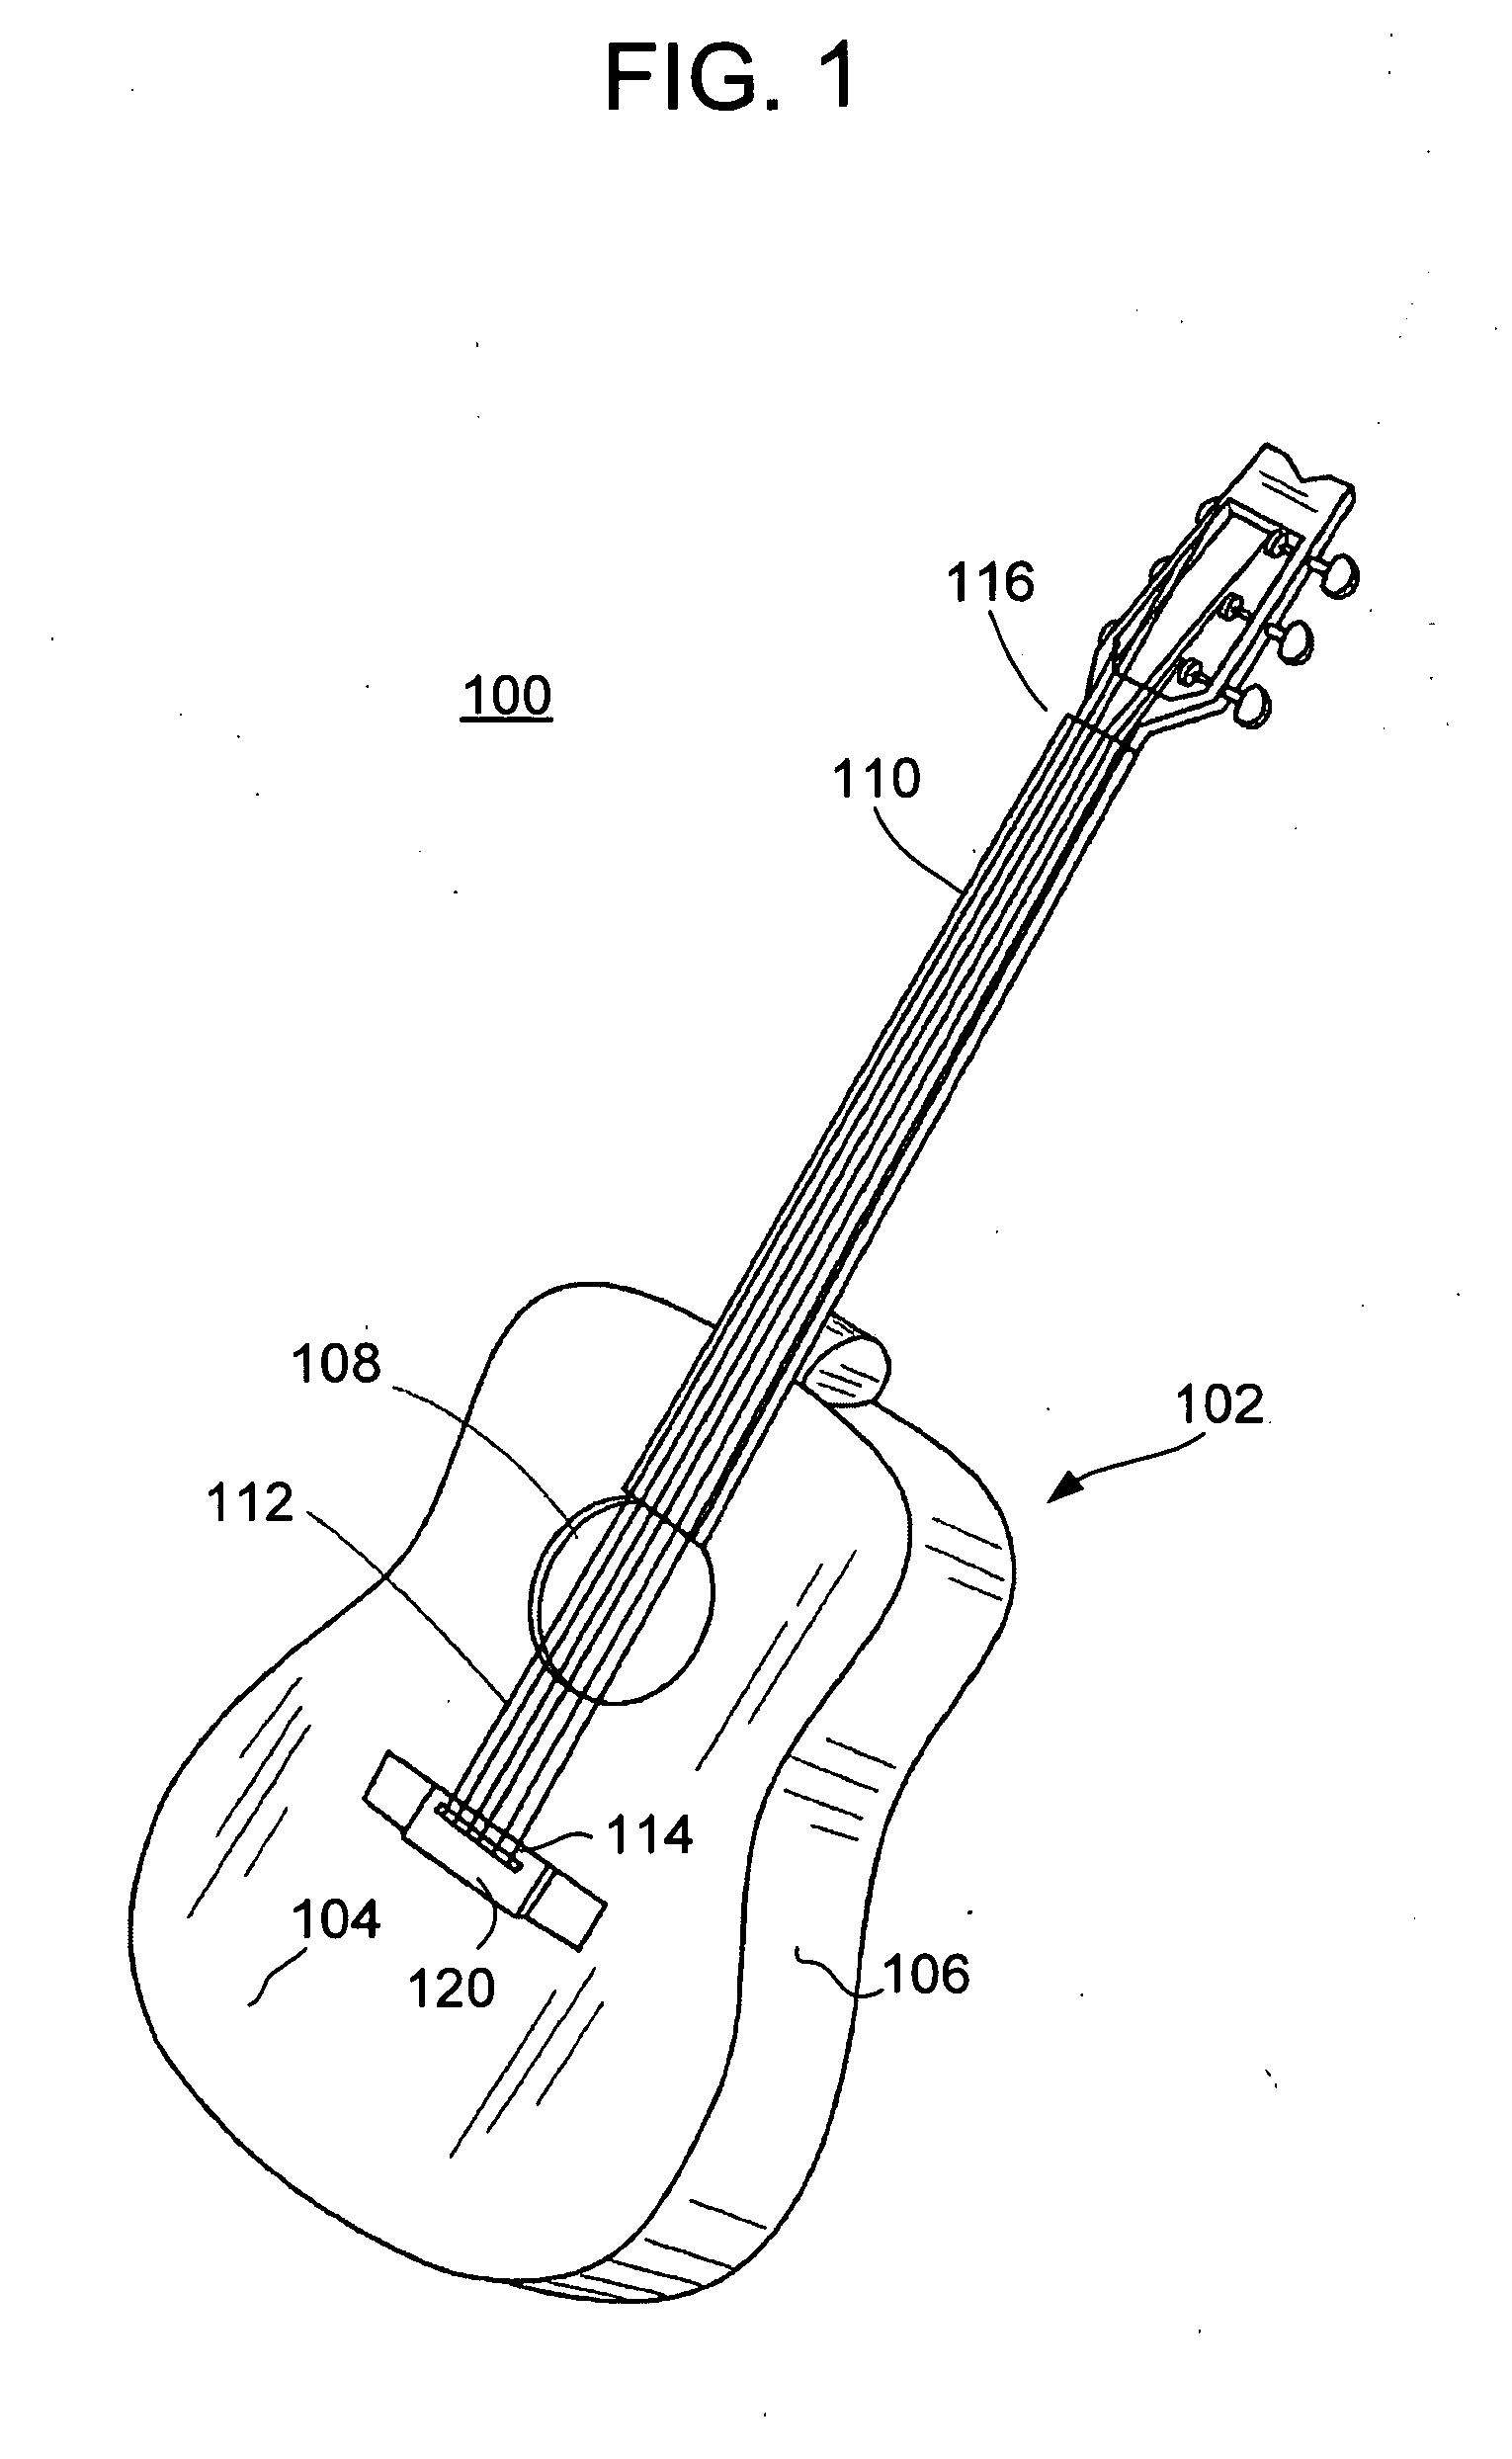 Acoustic Guitar With Resonators Augmenters Disposed Therein